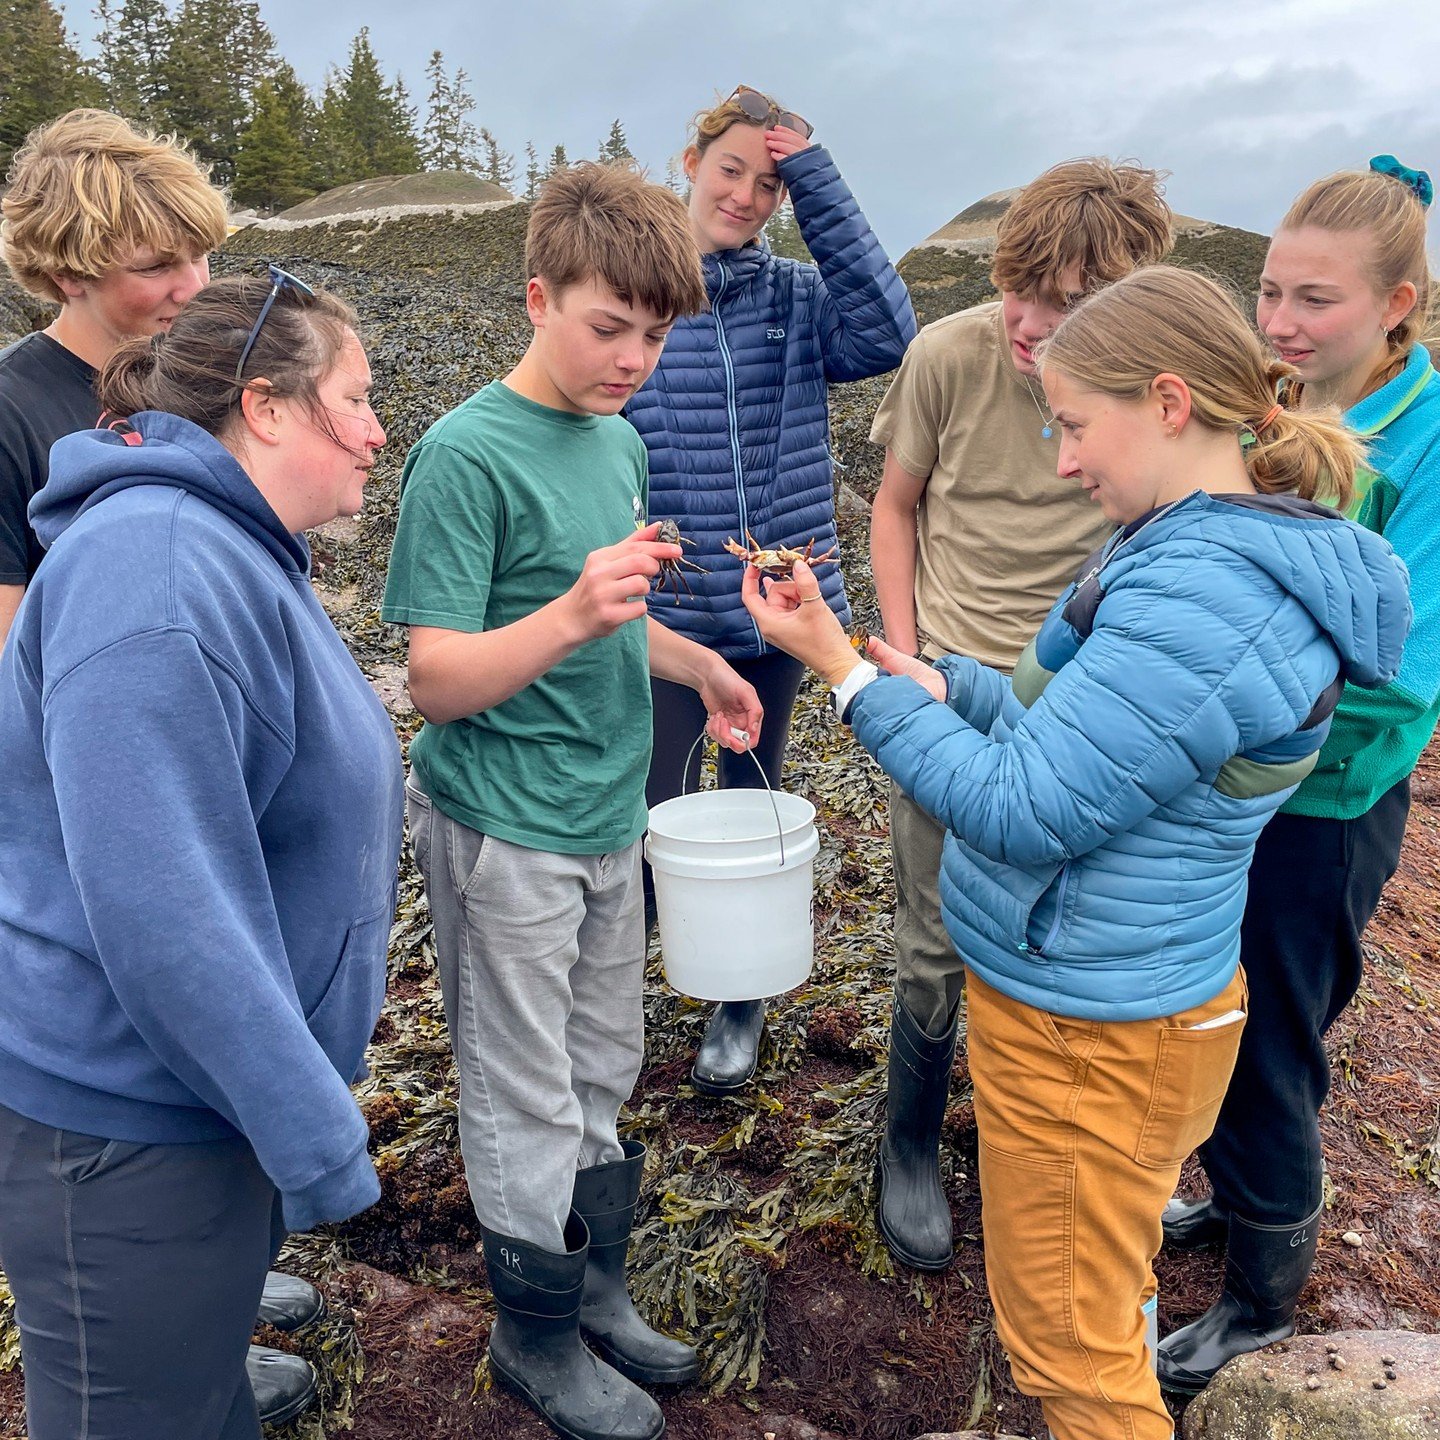 &ldquo;Hurricane Island is a magical place,&rdquo; said Dean of Community Life and Belonging Katie Stack. &ldquo;We engaged in service learning projects and group initiatives like the infamous raft challenge. We hiked, went out on the ocean, and used